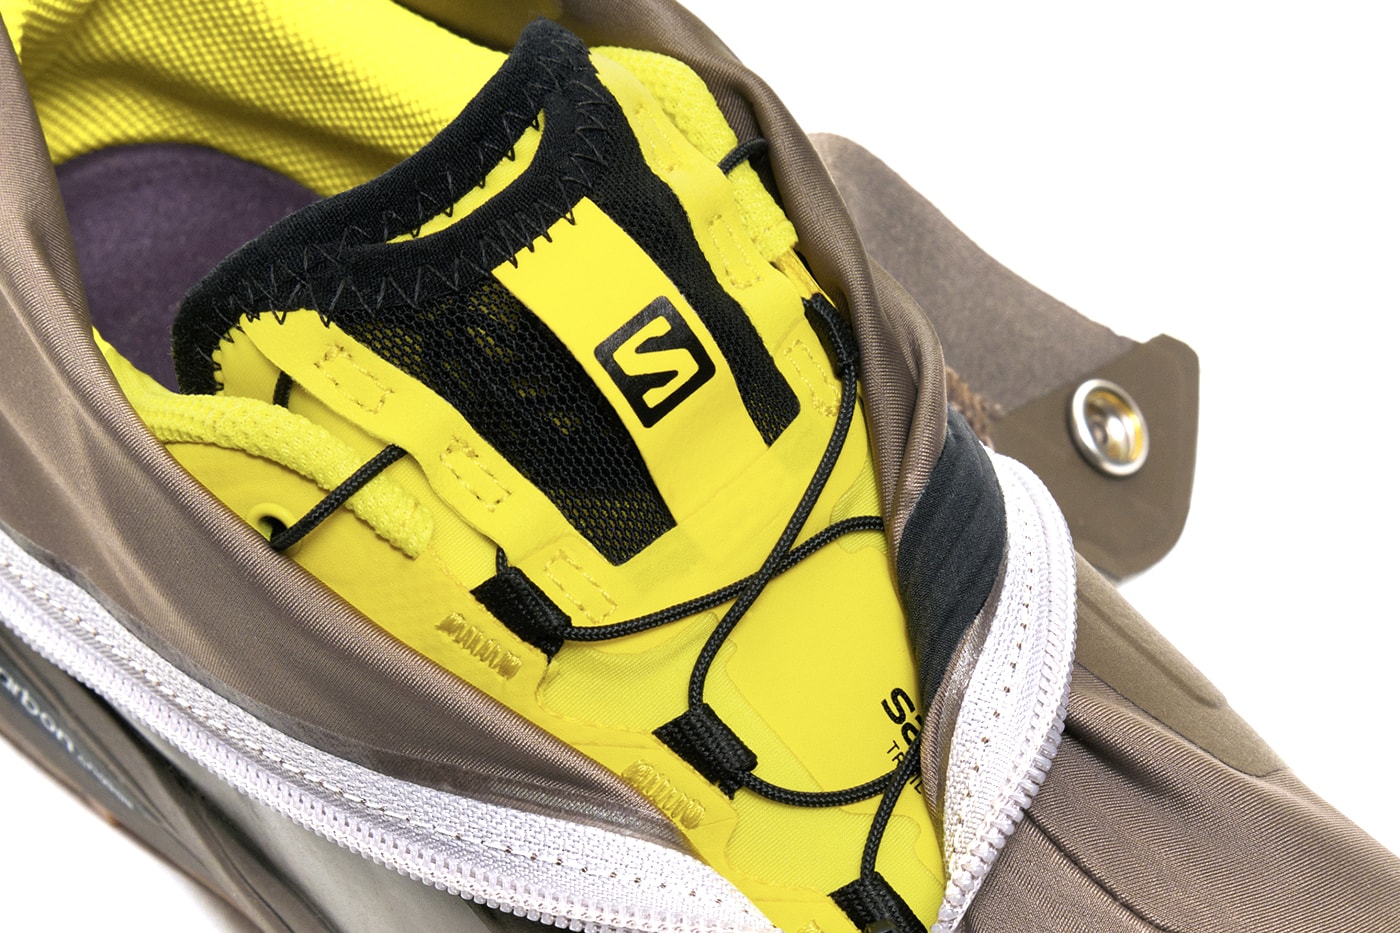 Salomon Pas Normal Studios collaboration cycling spring summer ss23 february 2 bag shoe release info date price